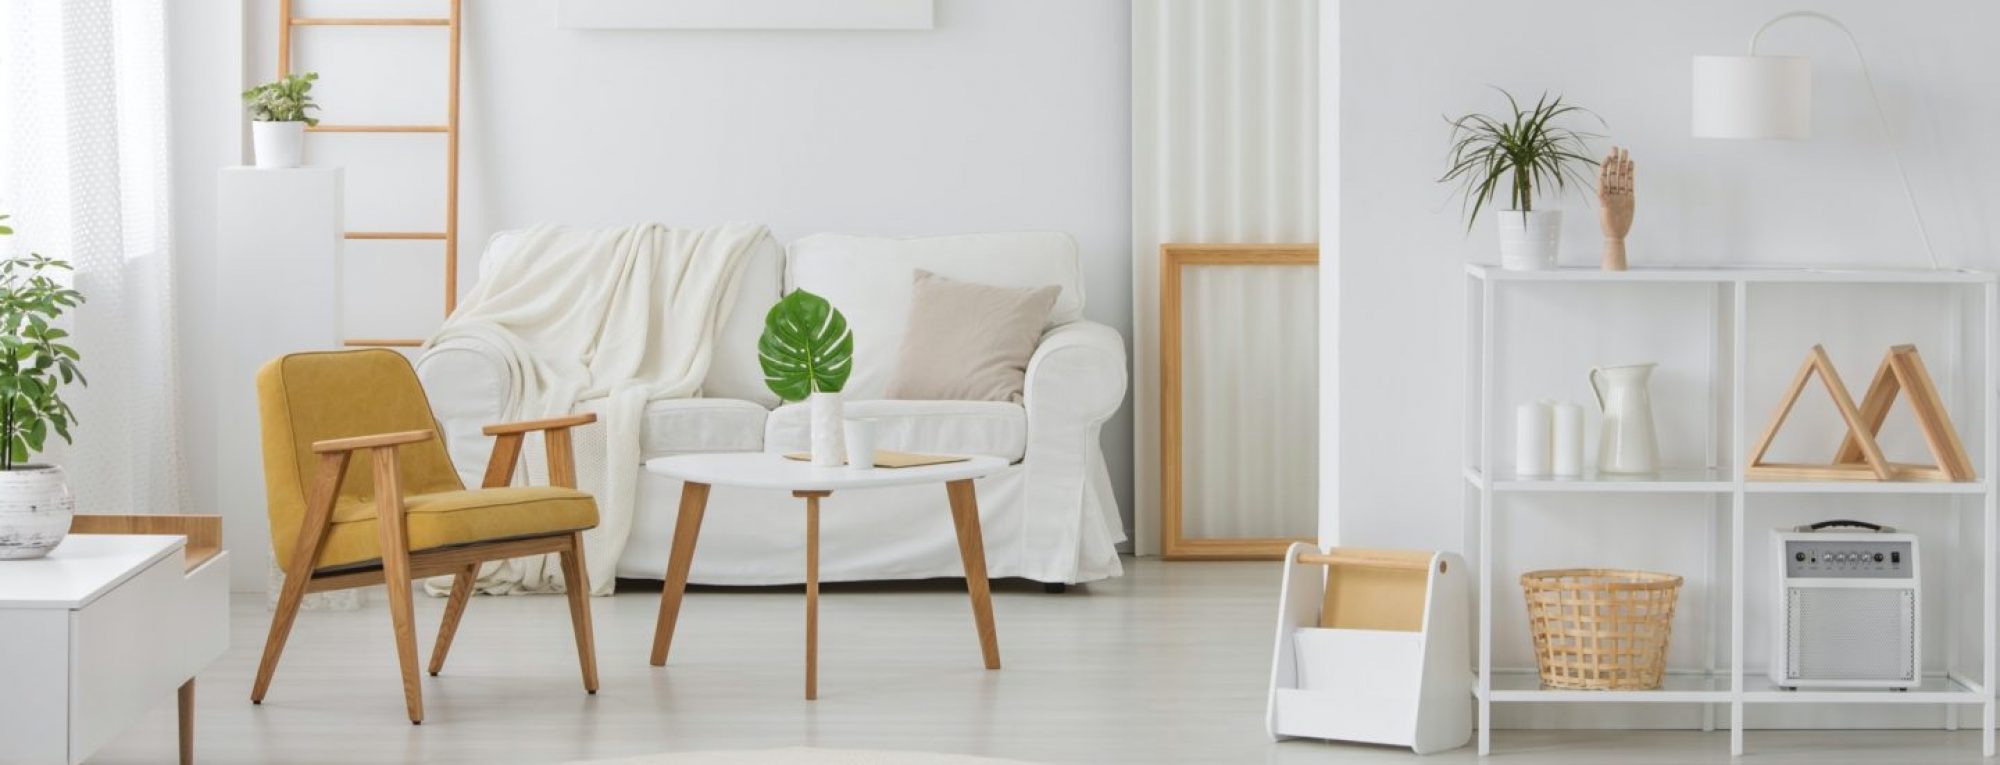 White furniture with wooden elements